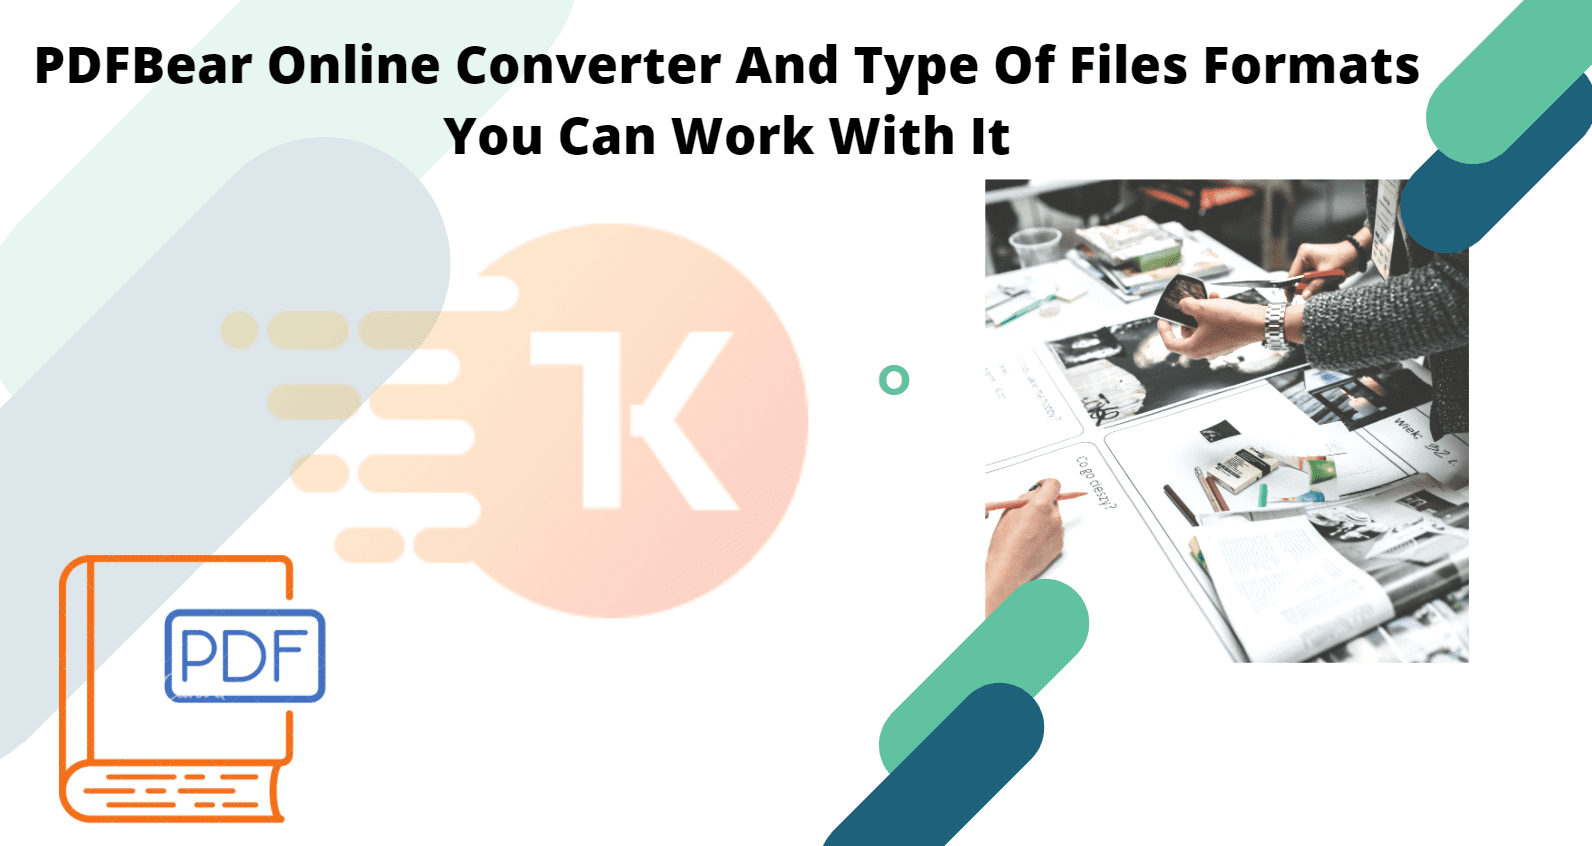 PDFBear Online Converter And Type Of Files Formats You Can Work With It